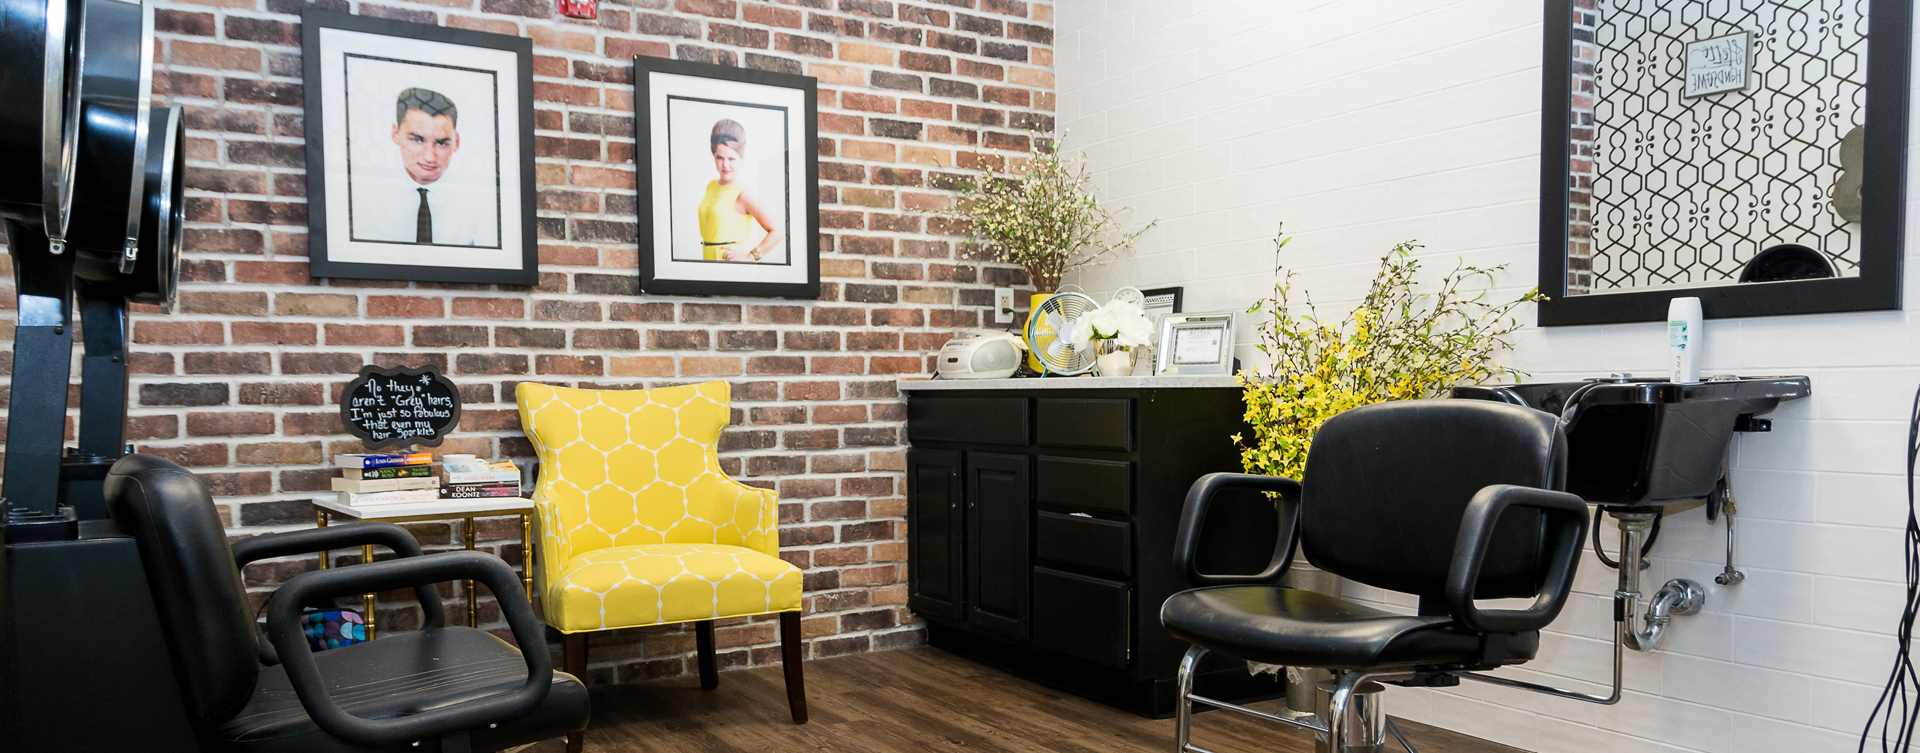 Strut on in and find out what the buzz is all about in the salon at Bickford of Oswego